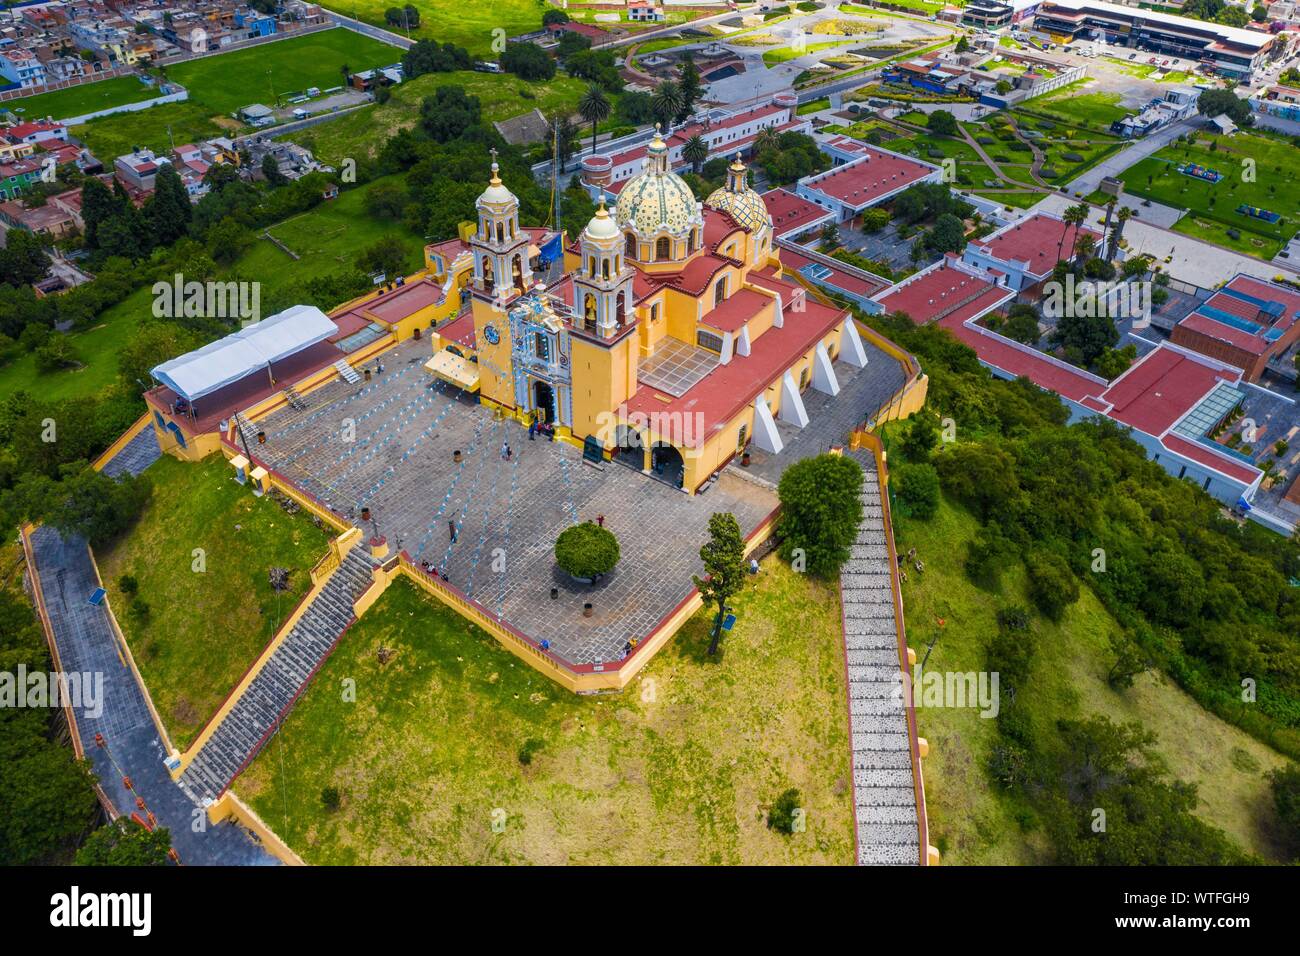 Aerial view of the Sanctuary of the Virgen de los Remedios in the Archaeological Zone of Cholula, Puebla, Mexico. Tlachihualtépetl. Puebla has Mexican traditions: gastronomic, colonial architecture and ceramics. Painted talavera tiles adorn ancient buildings. The cathedral of Puebla, in Renaissance style, has a high-rise bell tower overlooking the Zocalo, the central square or zocalo. I enter historical. Architecture is a UNESCO World Heritage Site. Attractions: Cathedral, Temple of Our Lady of Concord, Former Carolino College, Palafoxiana Library, Temple of Santo Domingo.  (© Photo: LuisGutie Stock Photo